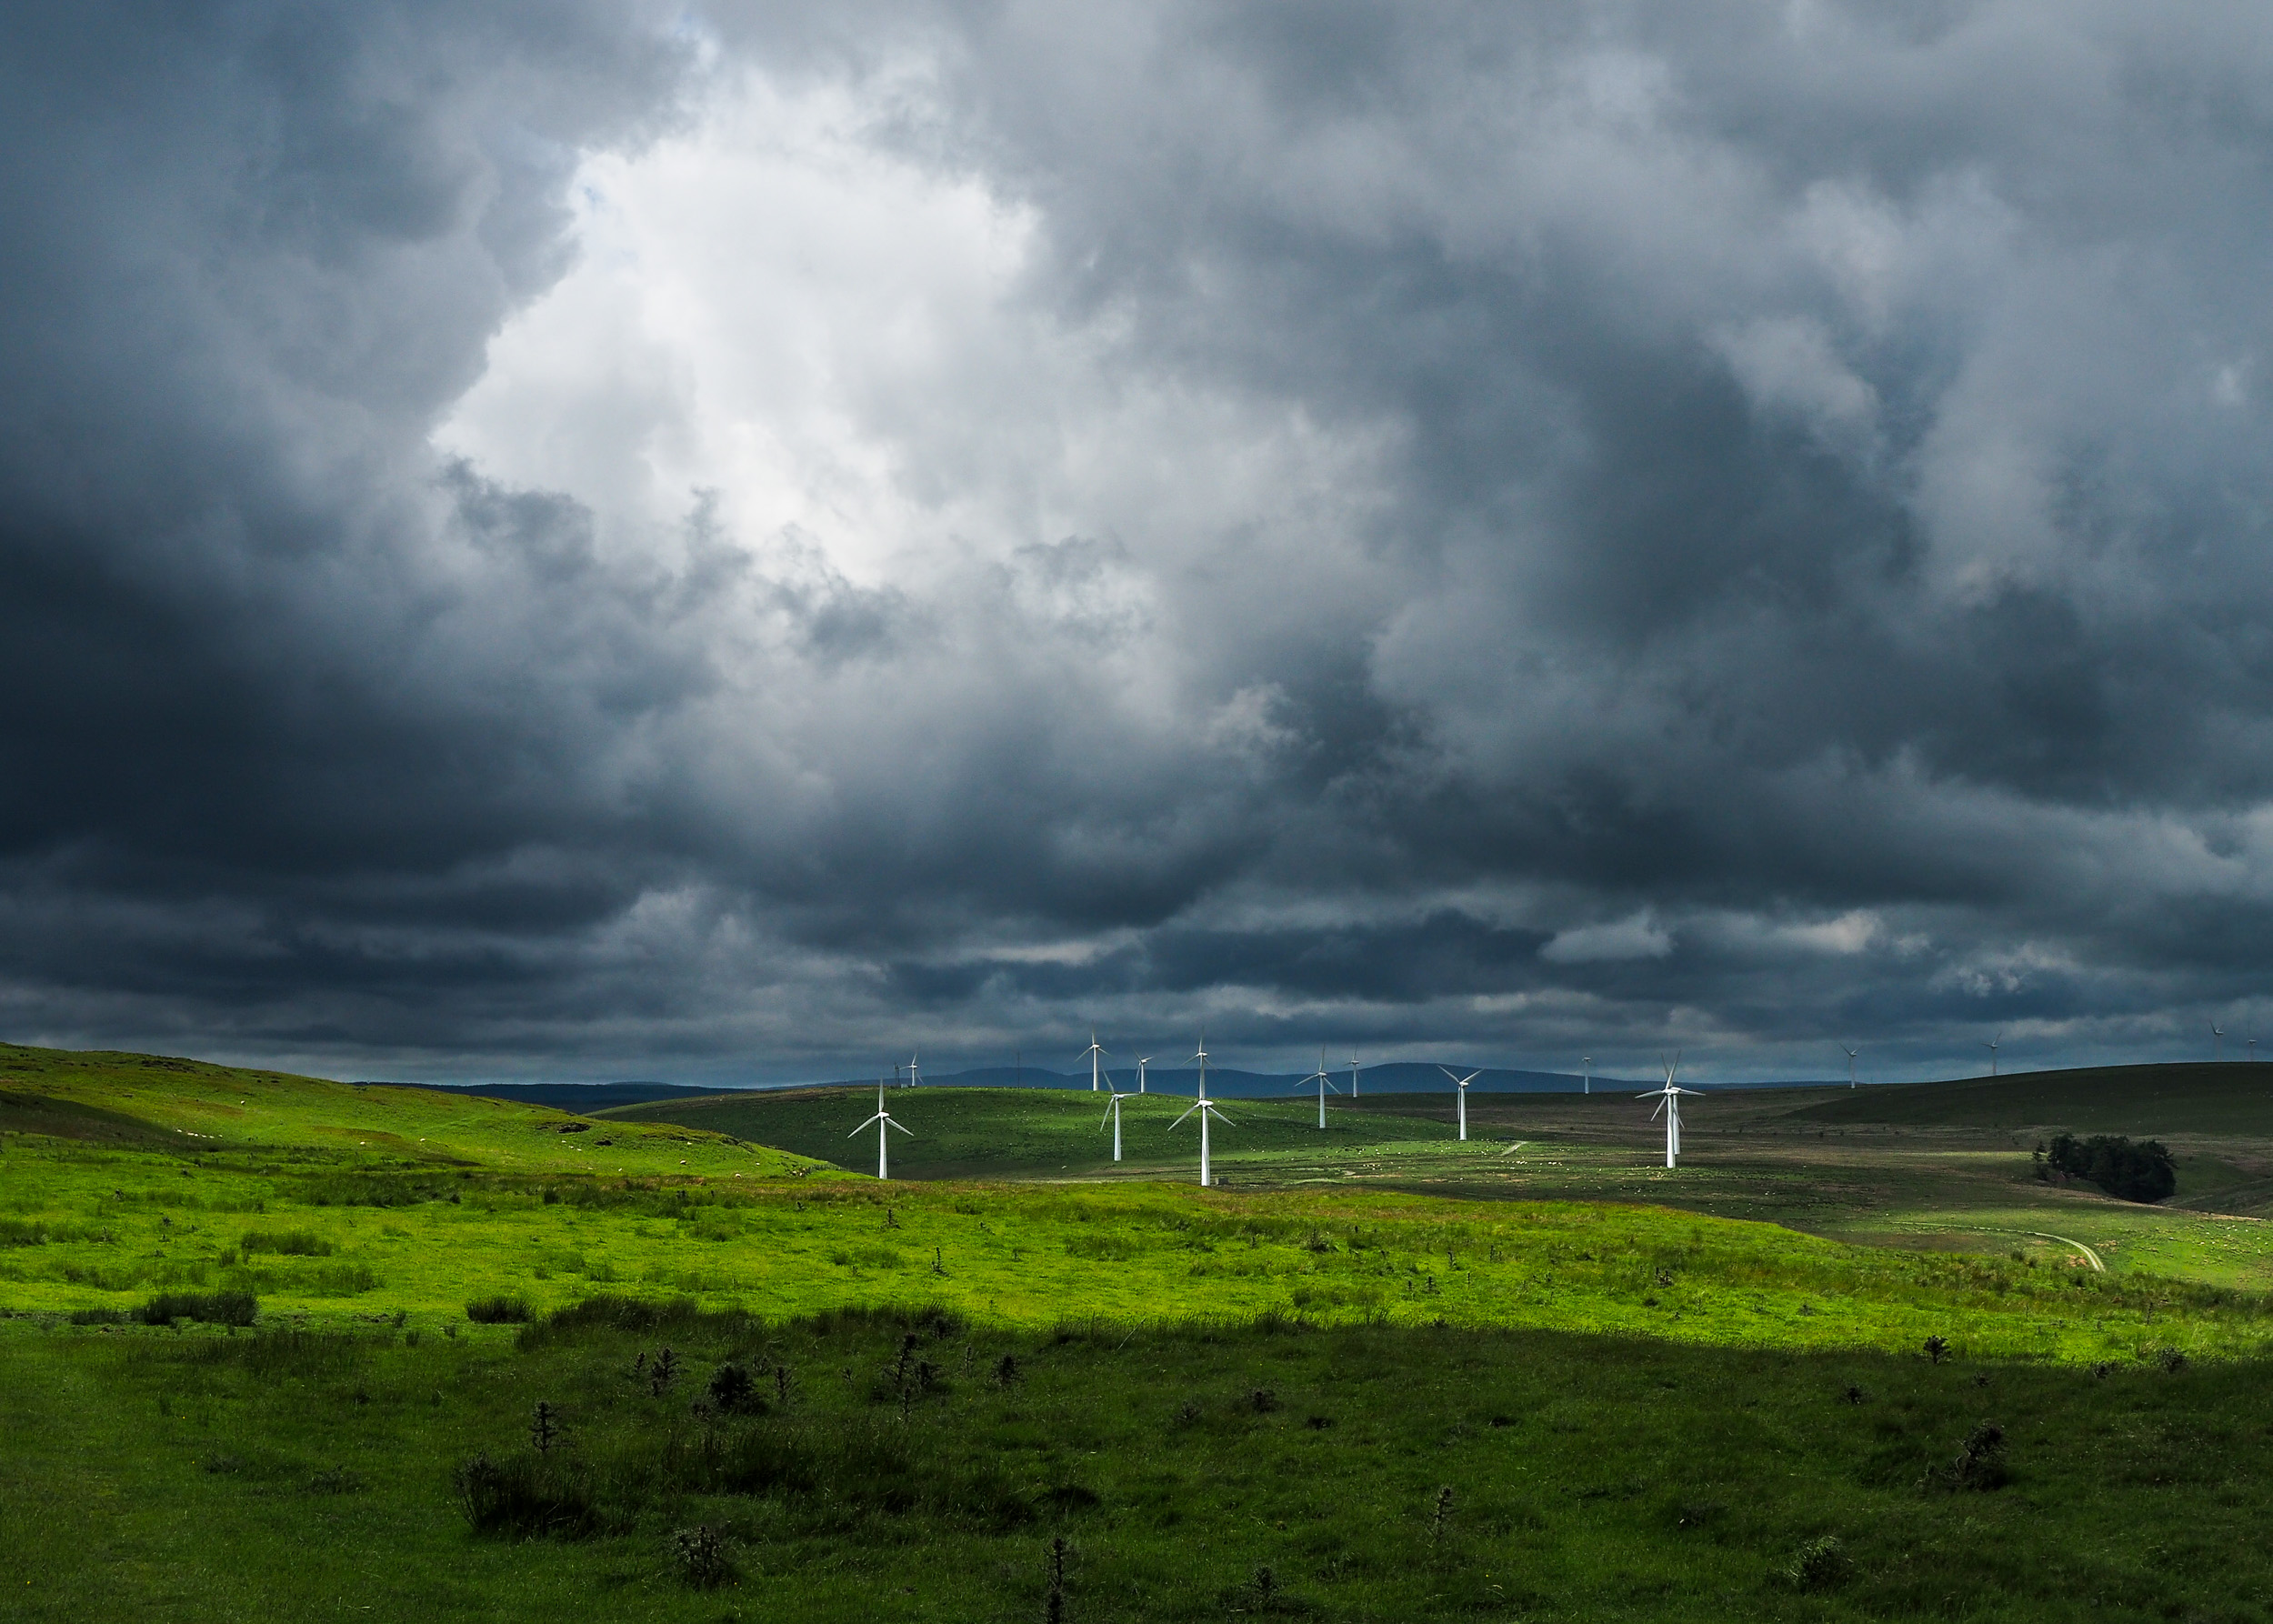 A wind farm in the hills above Rhayader in mind Wales